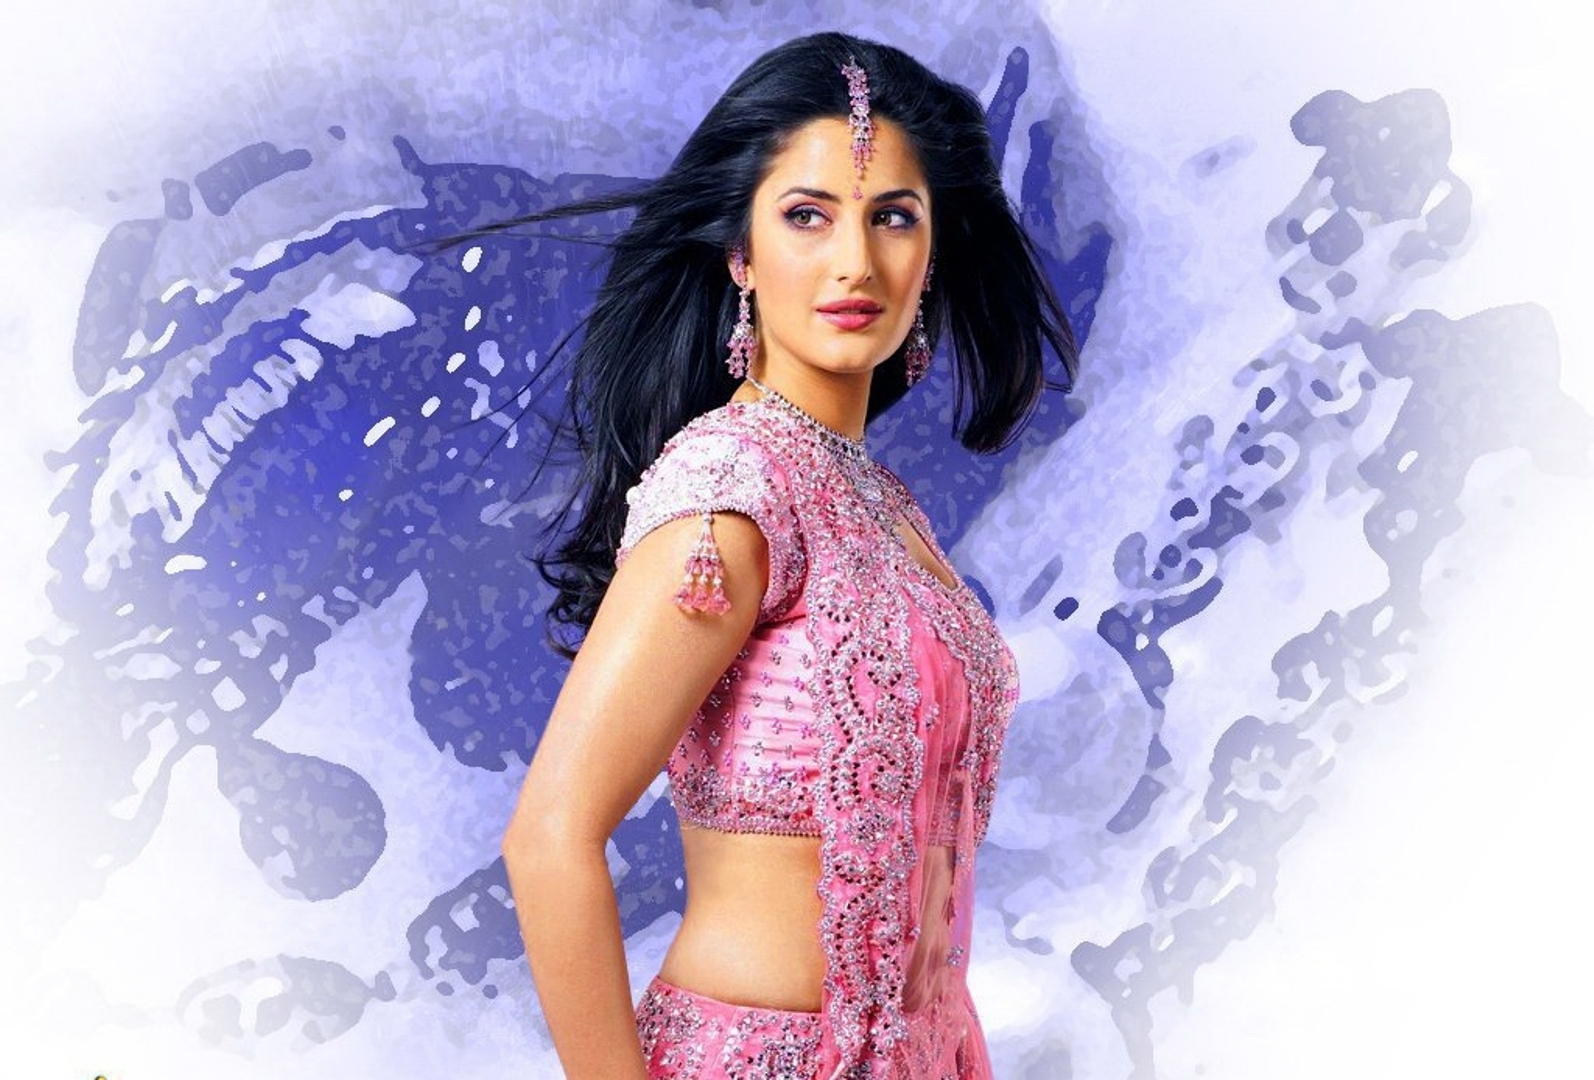 beautiful katrina kaif best pictures background mobile free hd download